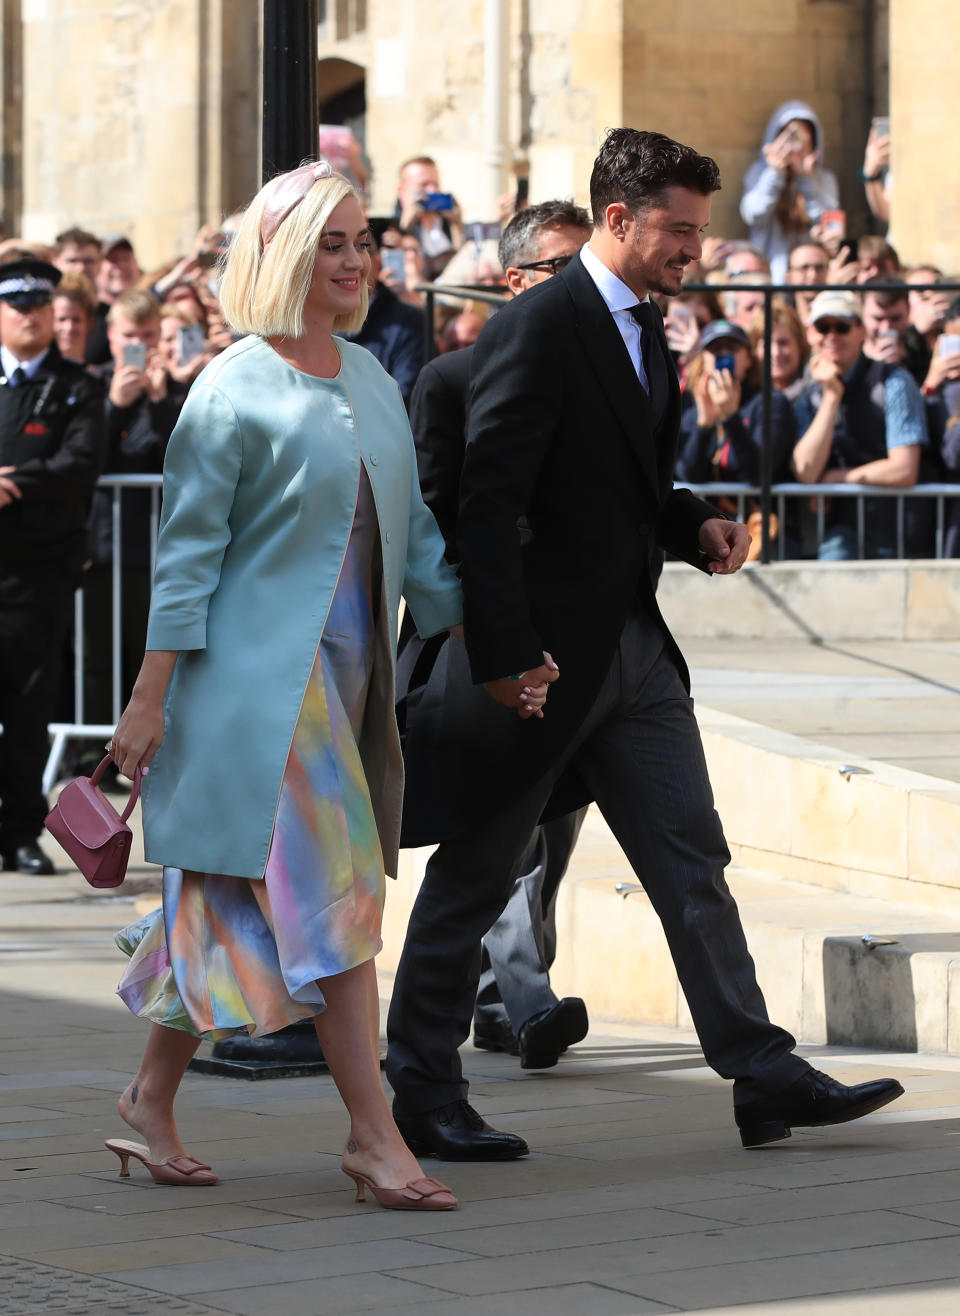 Katy Perry and Orlando Bloom arriving at York Minster for the wedding of singer Ellie Goulding to Caspar Jopling. (Photo by Peter Byrne/PA Images via Getty Images)